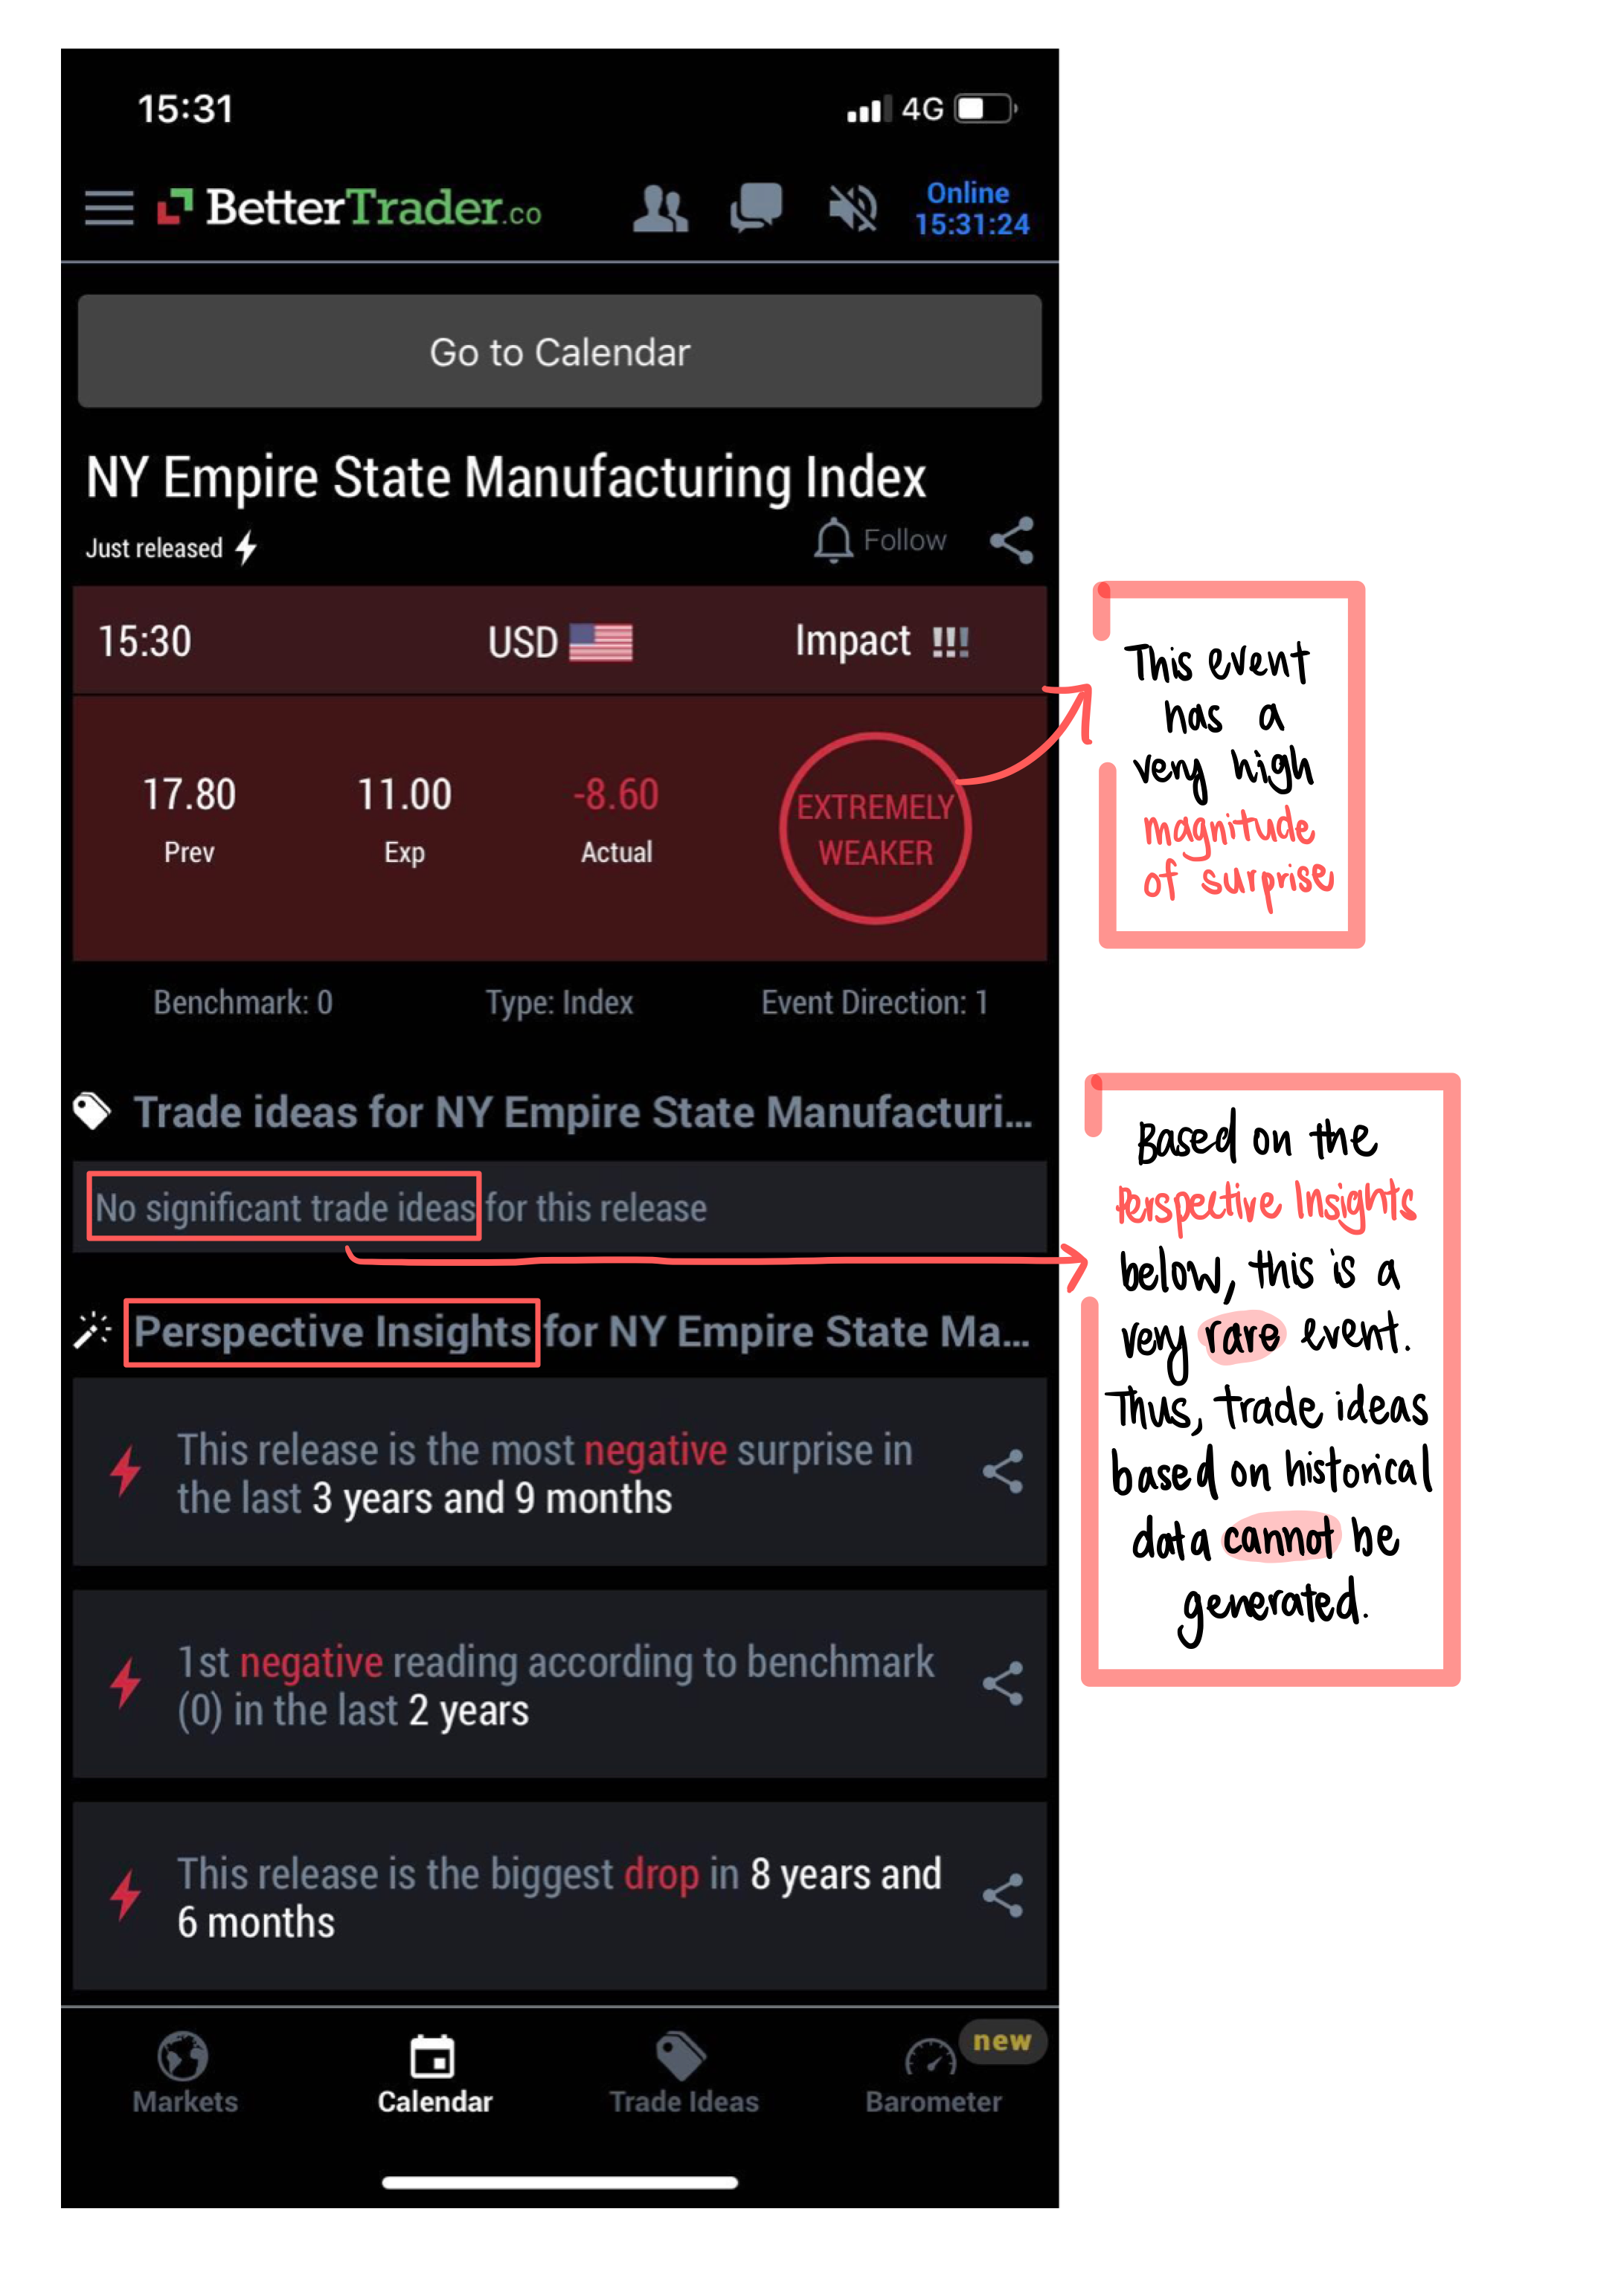 NY Empire State Manufacturing Index (June 2019)